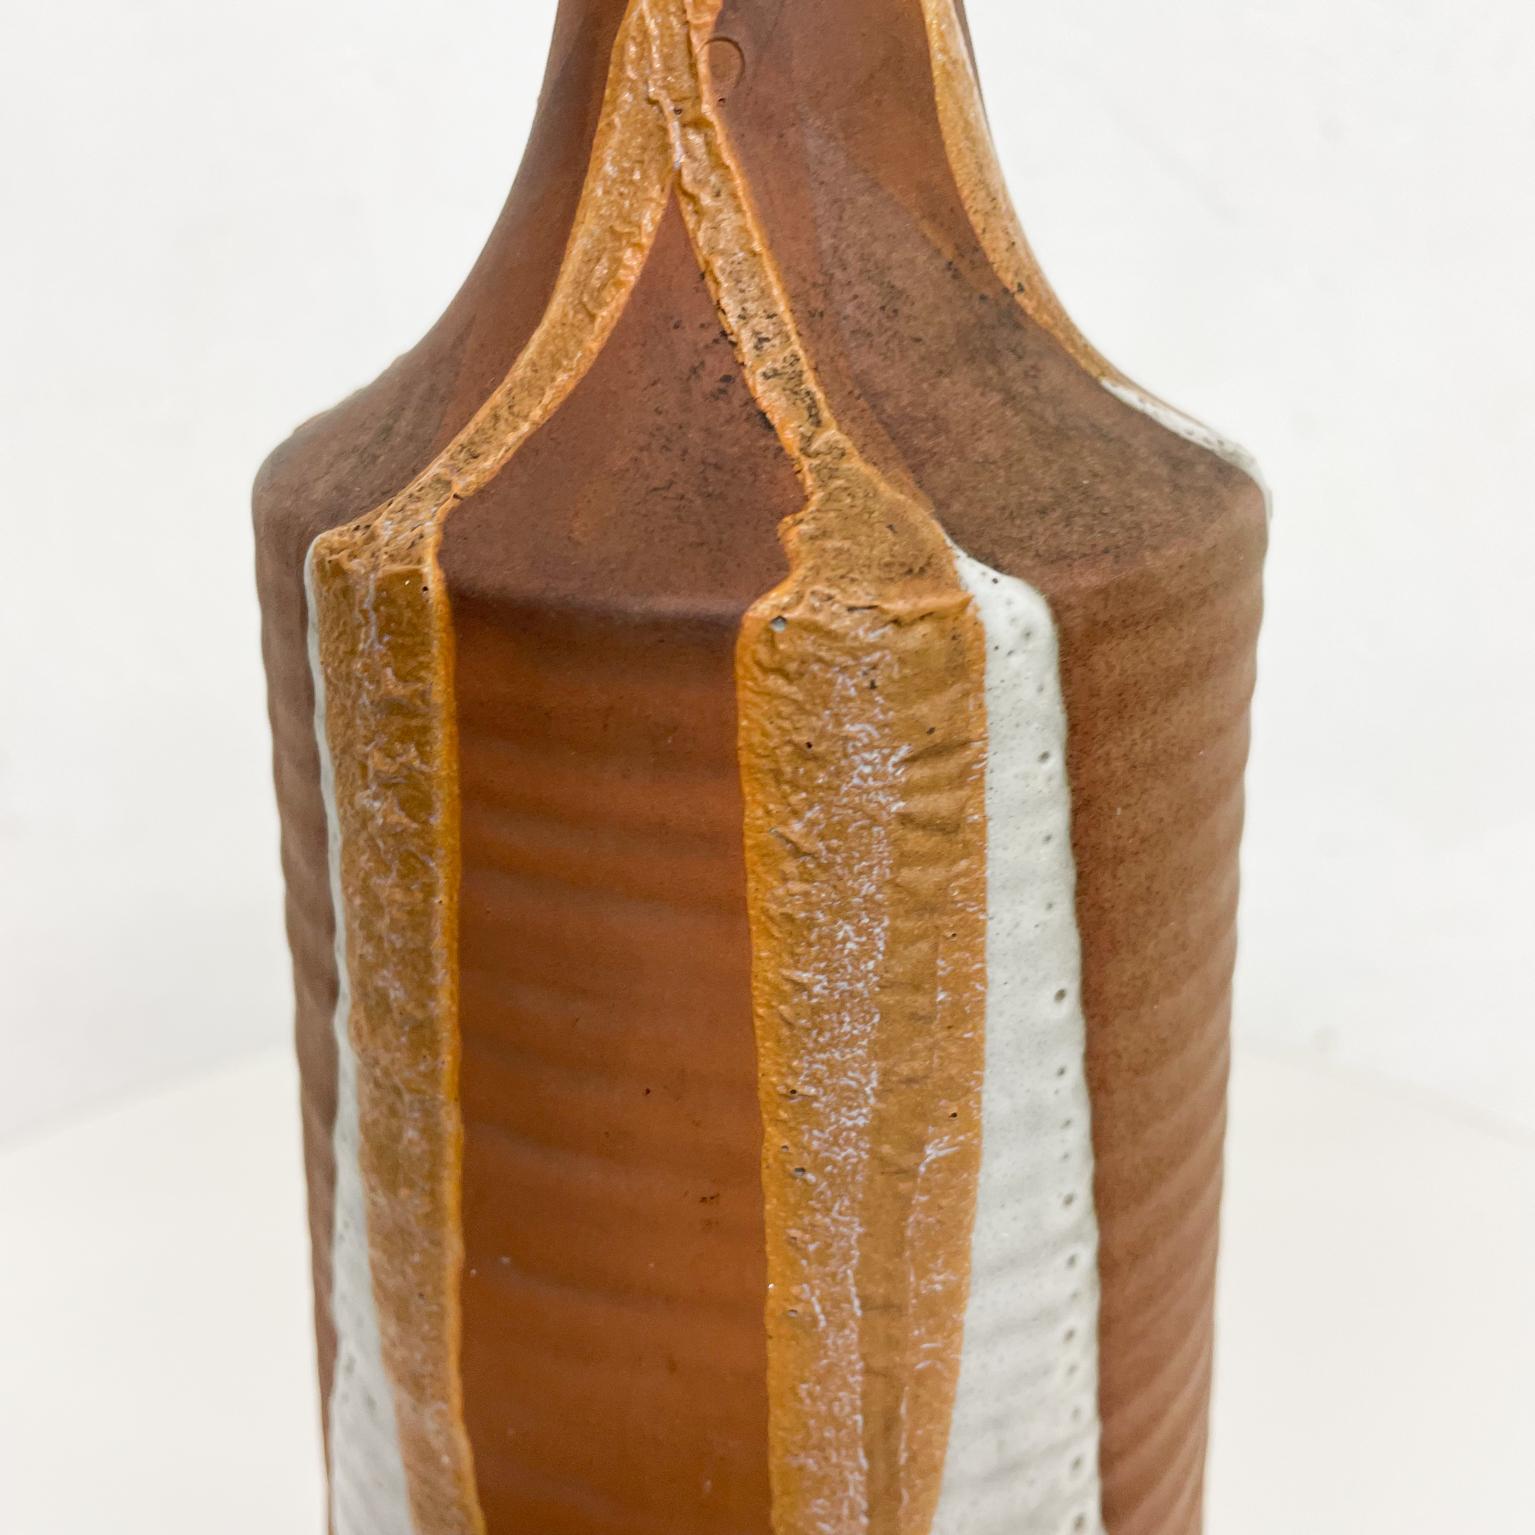 Late 20th Century Modern Art Sculptural Studio Pottery Vase Warm Colors David Cressey Style 1970s For Sale